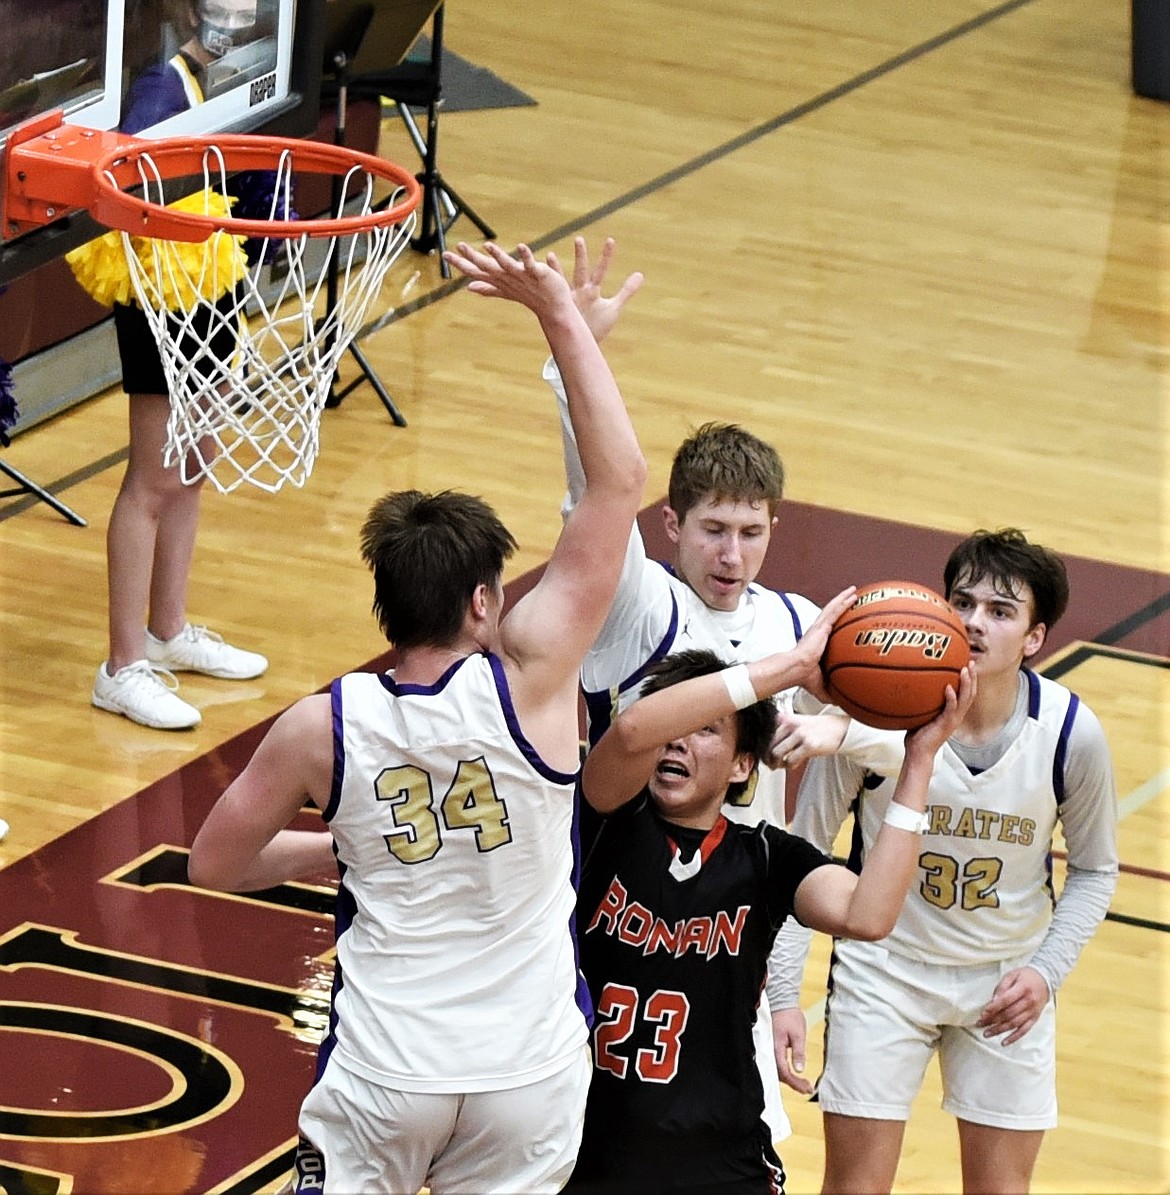 The Chiefs' Leoard Burke looks for a shot against Polson's Trevor Lake (34), Colton Graham (32) and Sam Fisher on Friday night at Pablo. (Scot Heisel/Lake County Leader)